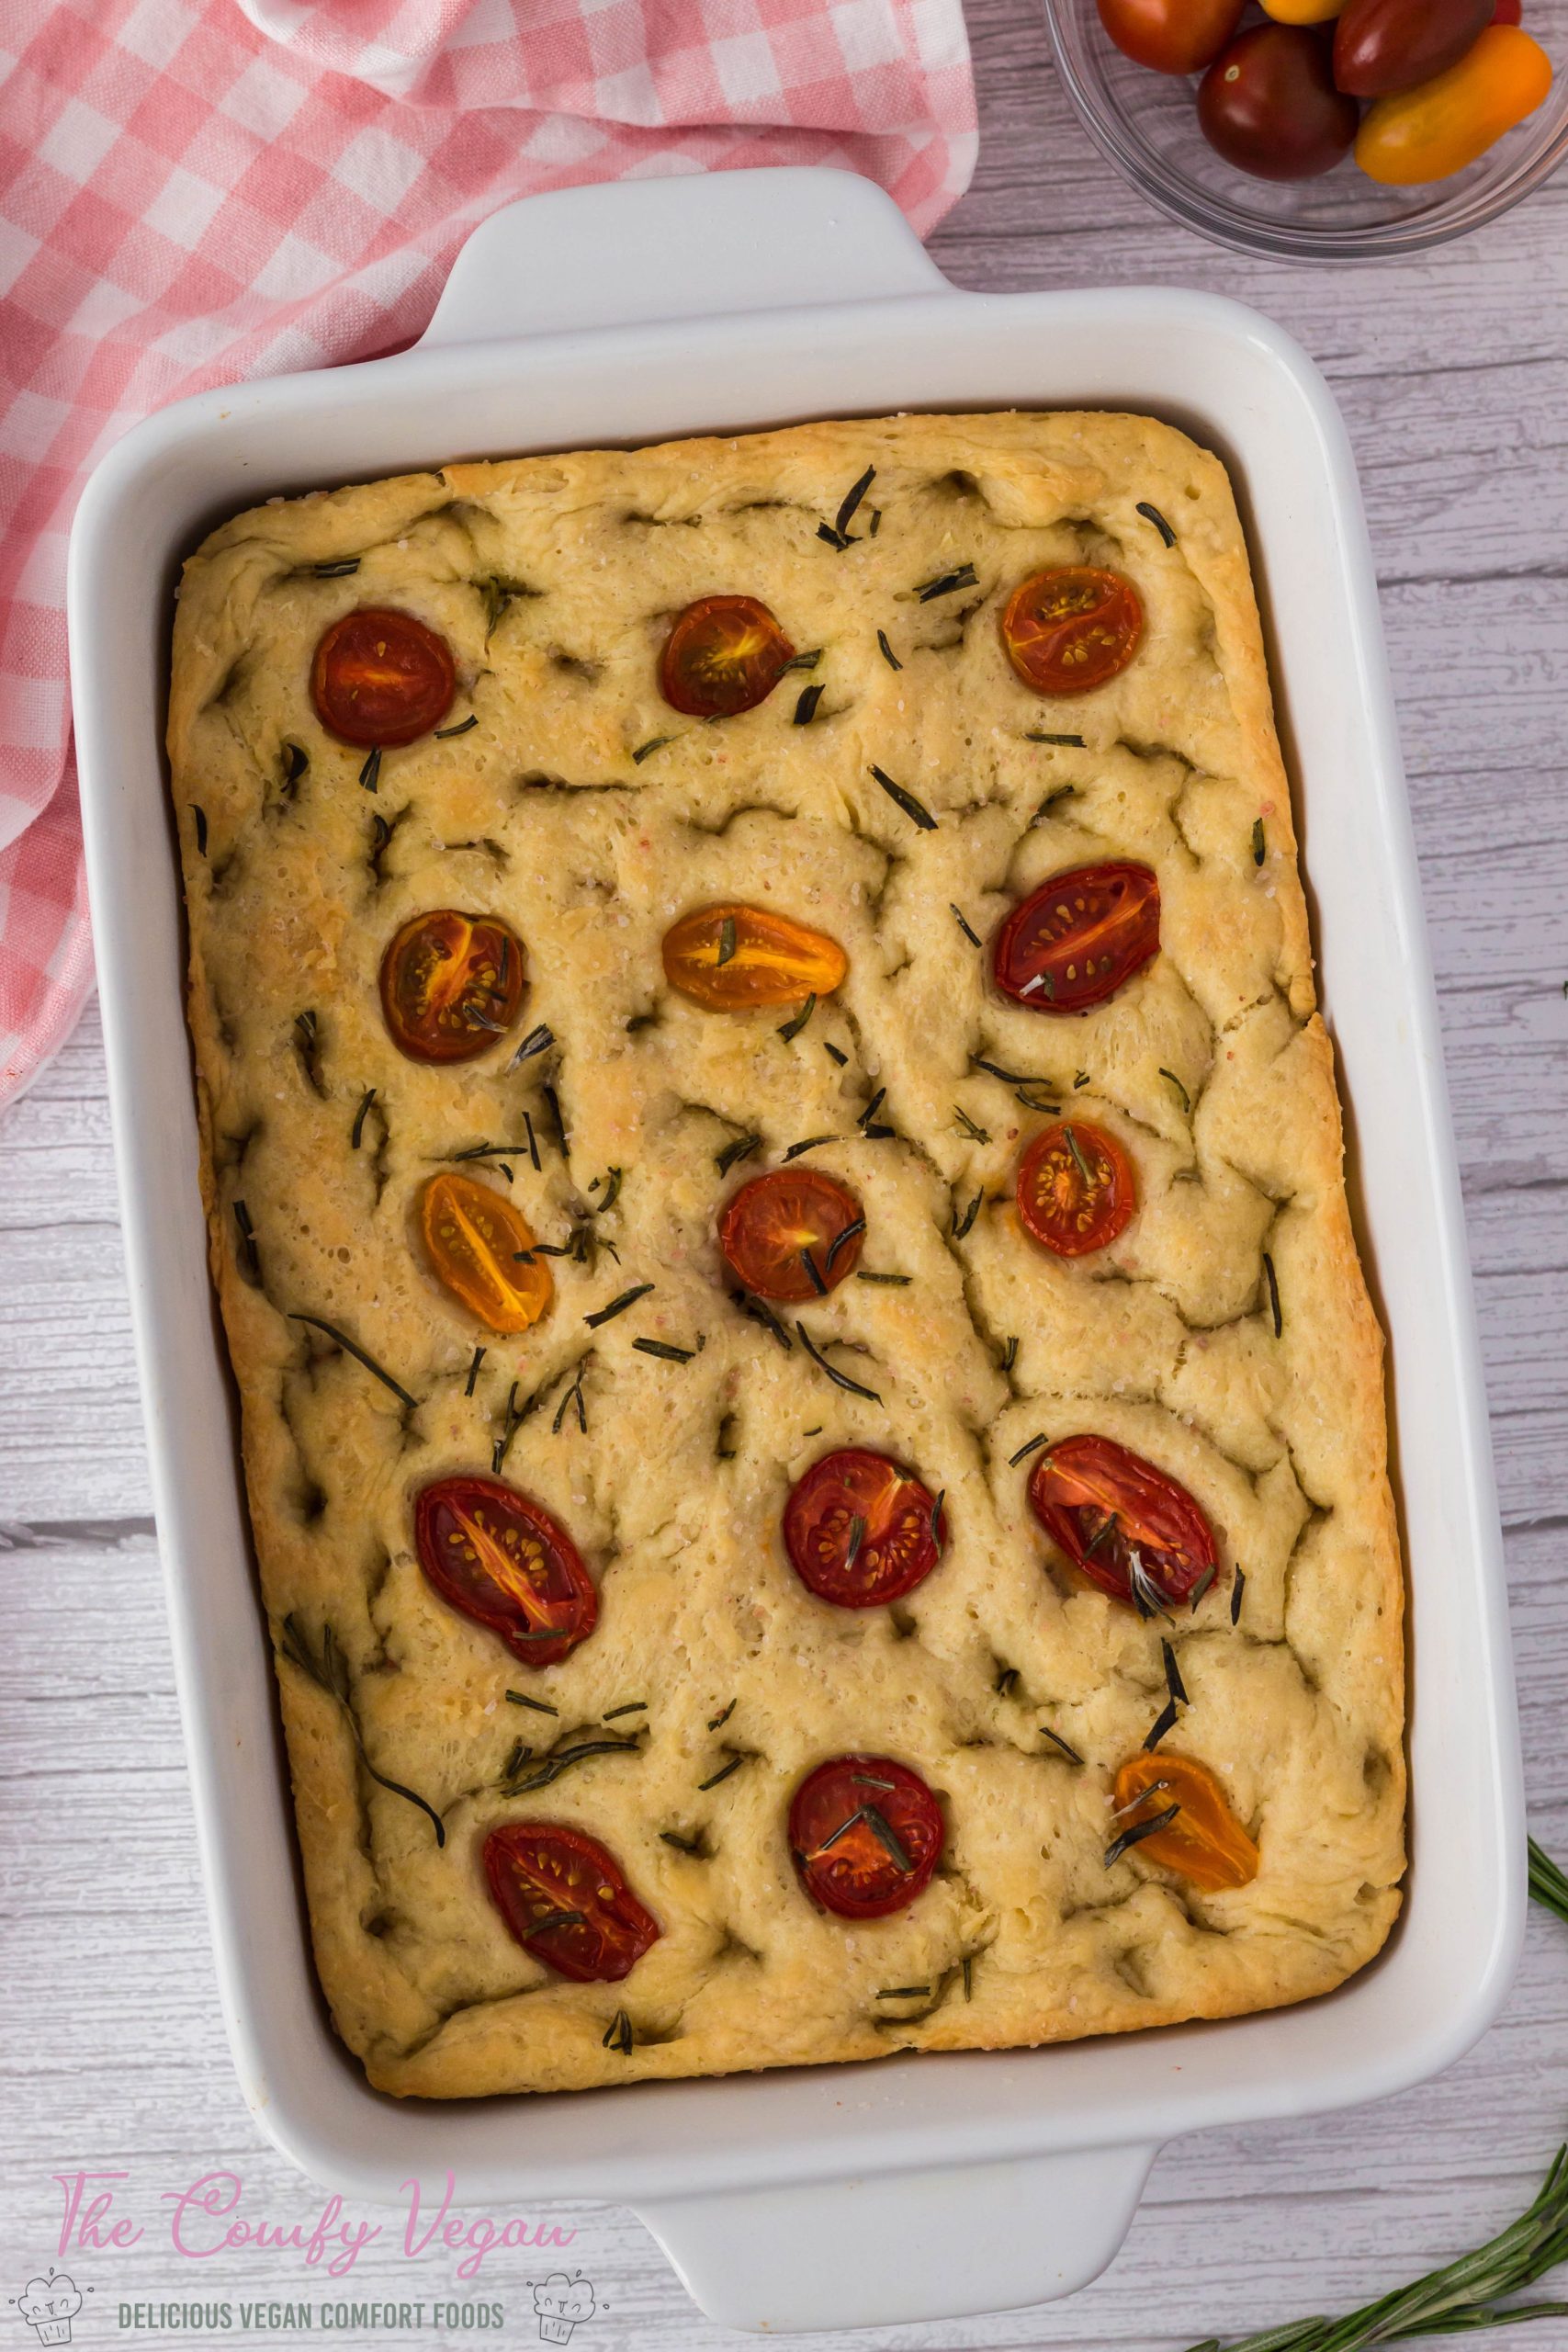 Vegan Focaccia bread is a delicious and easy homemade bread recipe that will impress your friends and family. Full of flavor and the perfect side dish to accompany your favorite salad or pasta. This version tastes like the original that's completely vegan.